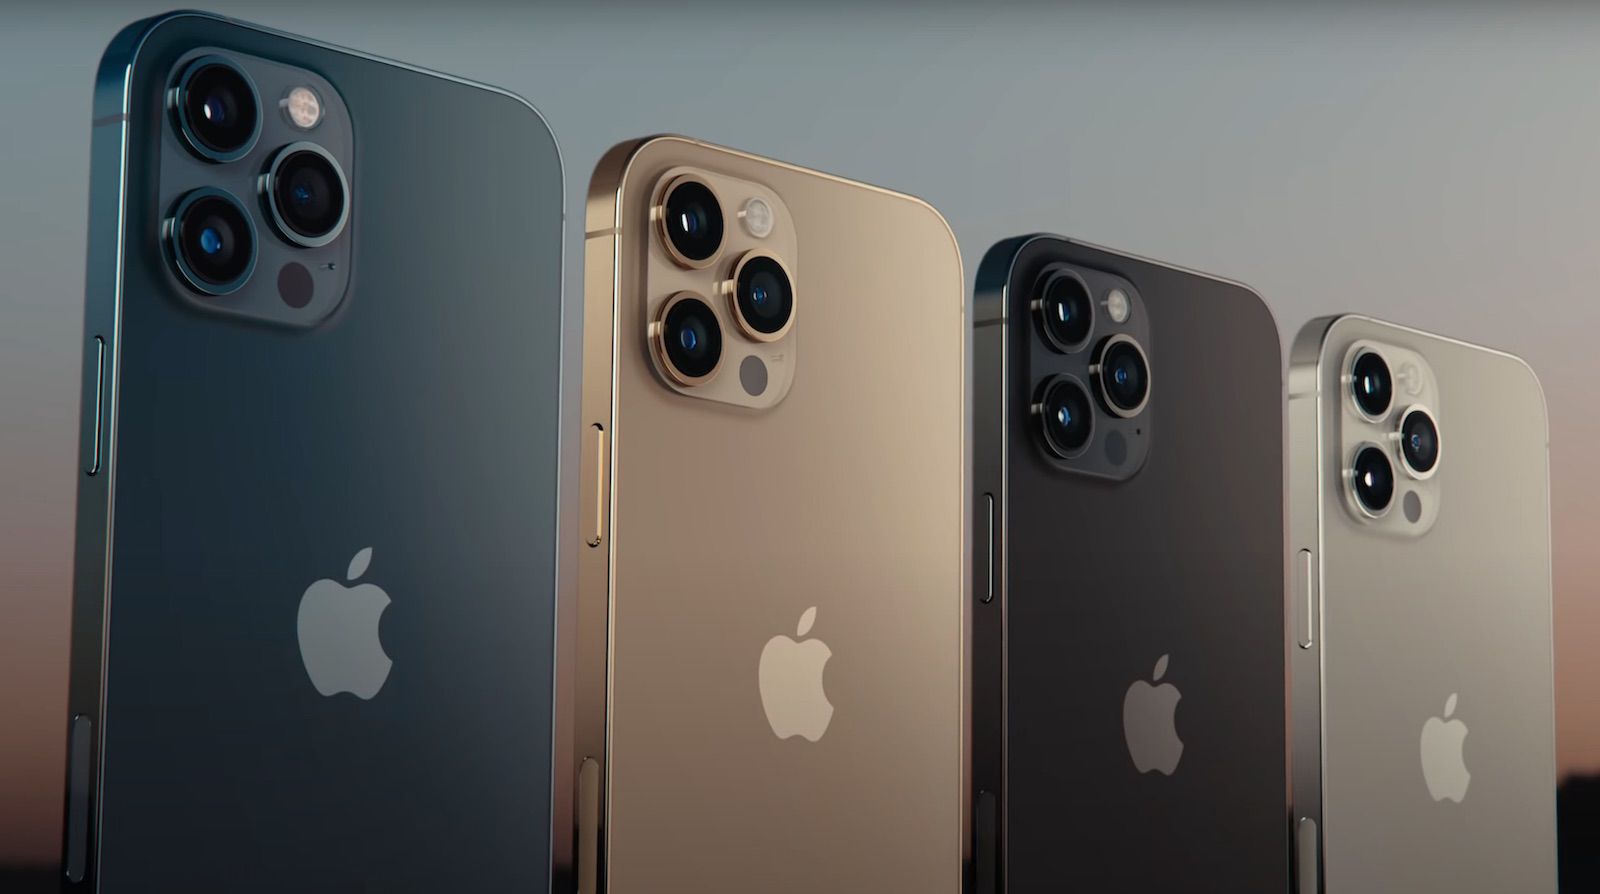 iPhone 12 Pro Models Have 6GB of RAM, iPhone 12 and 12 Mini Remain